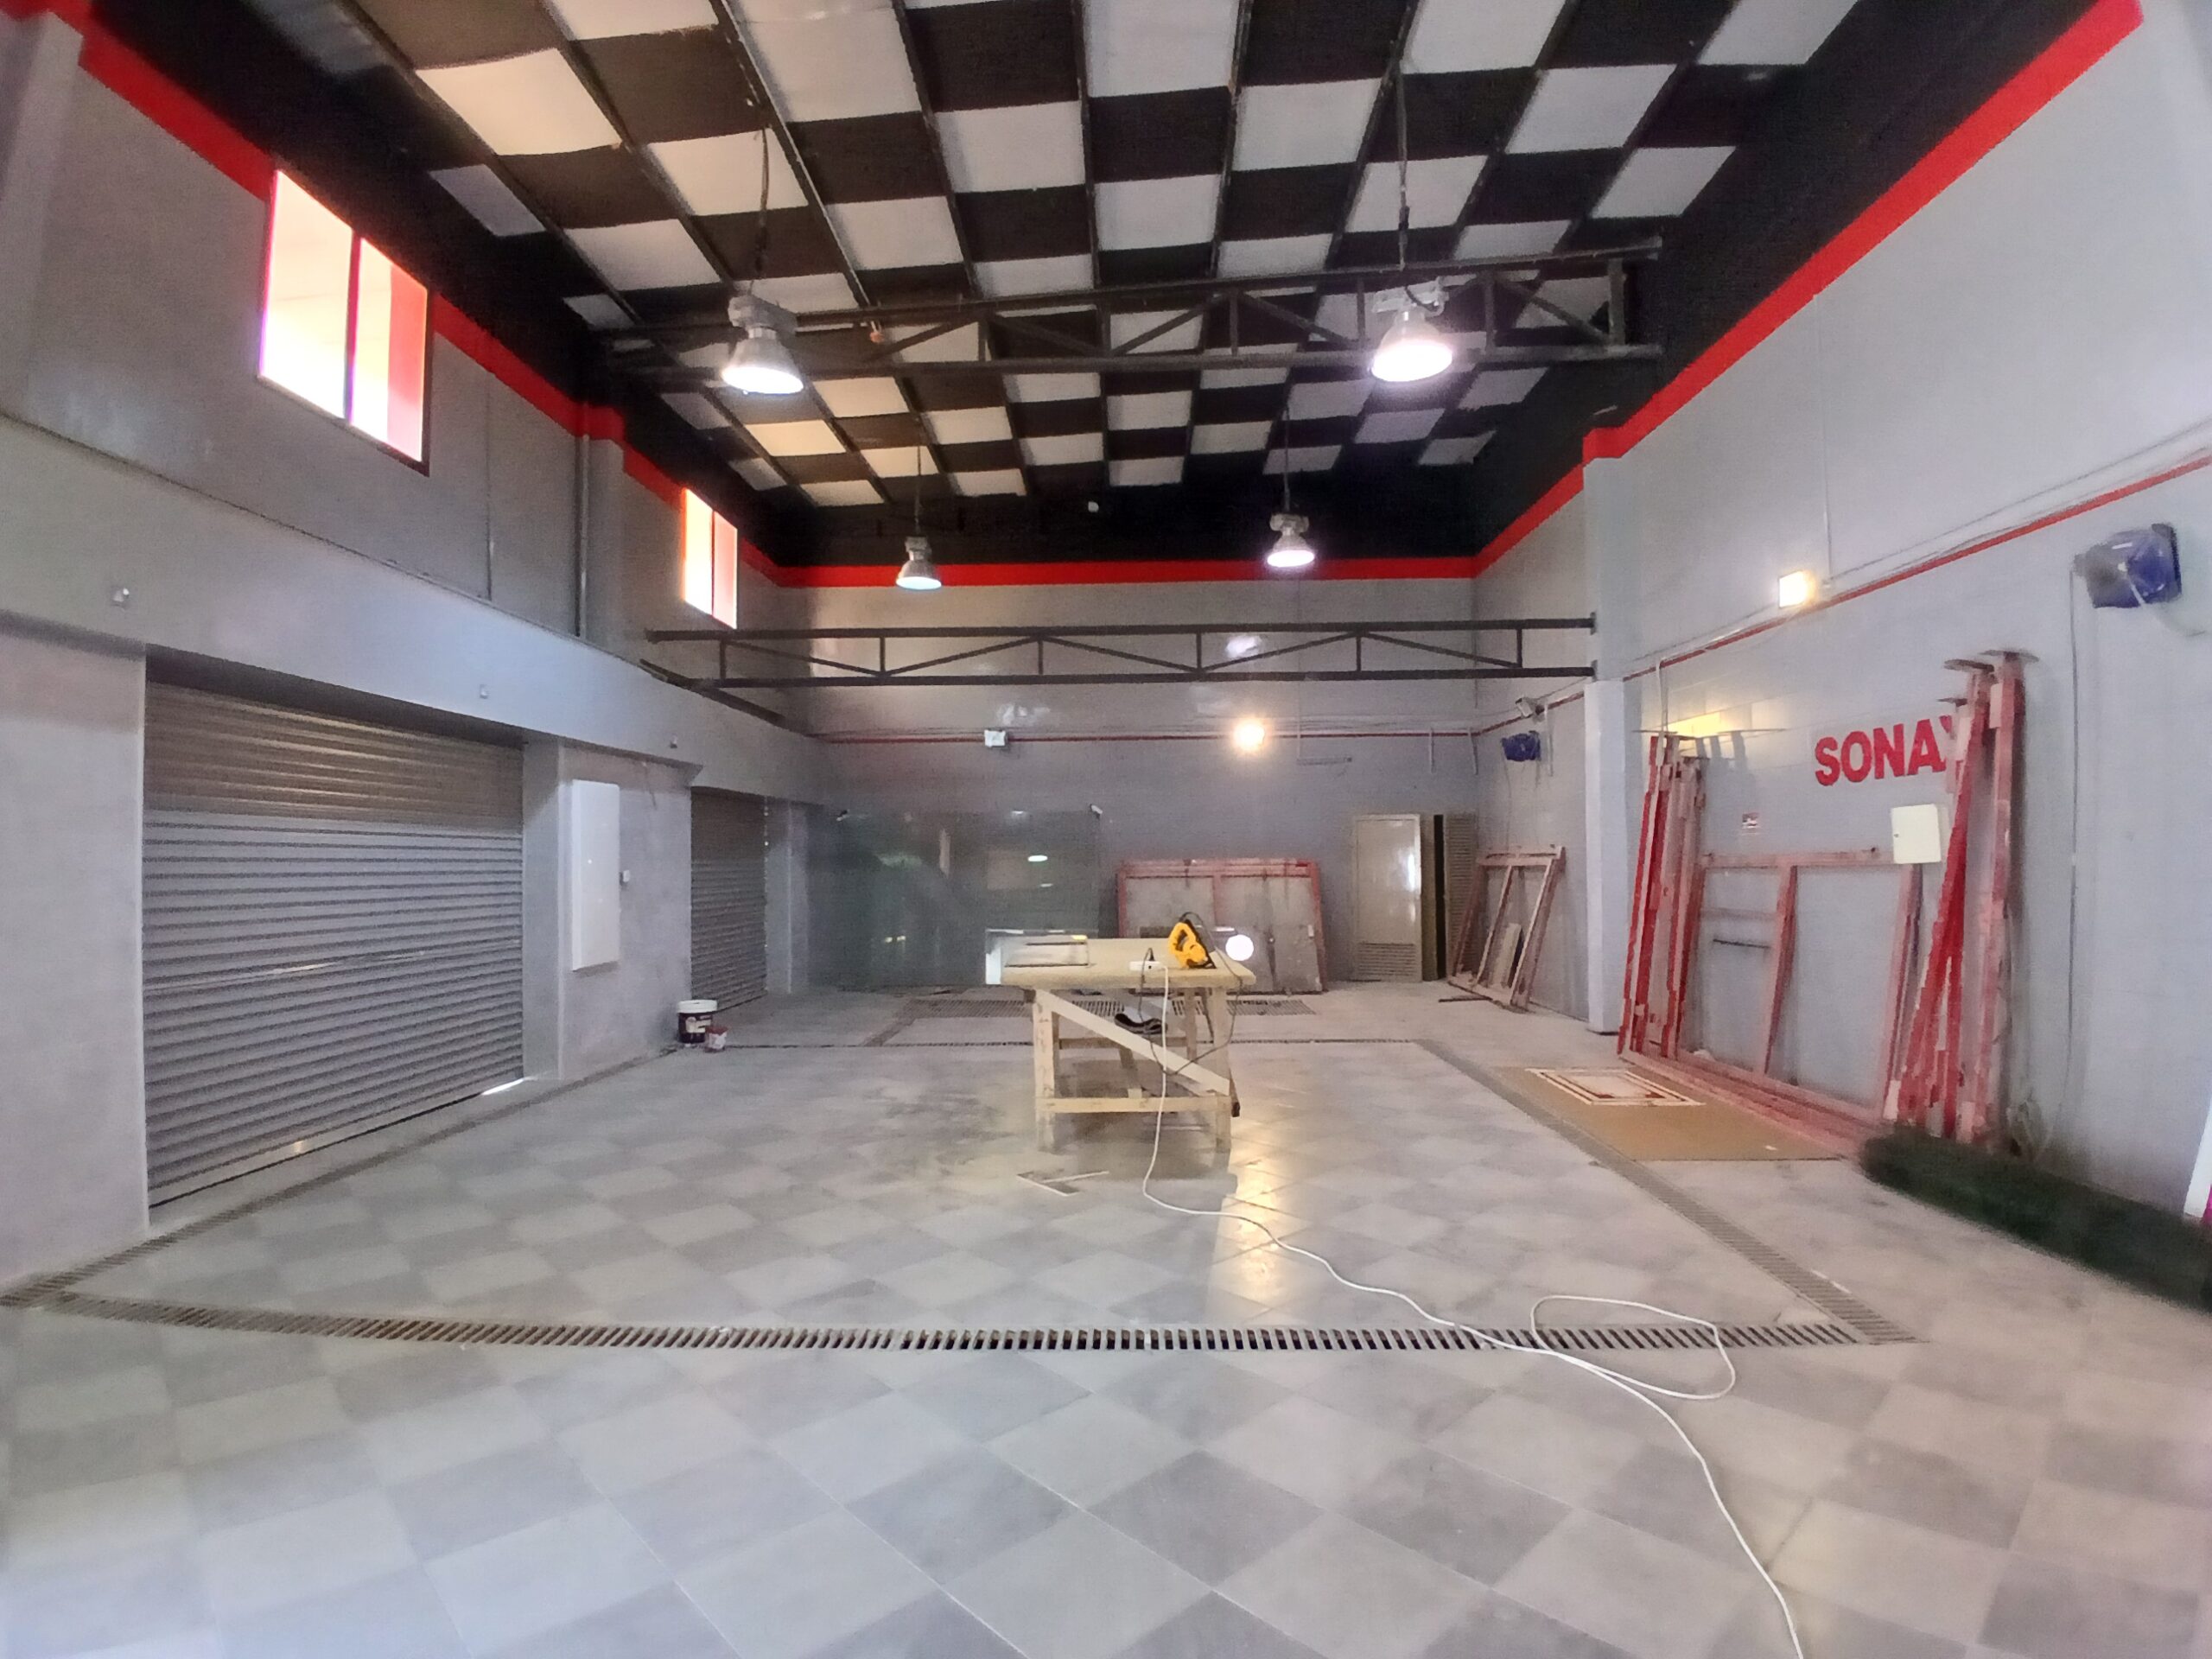 Semi-fitted industrial garage with checkered floor, black and white ceiling, red accents, and metal roll-up doors. A table with tools is in the center.